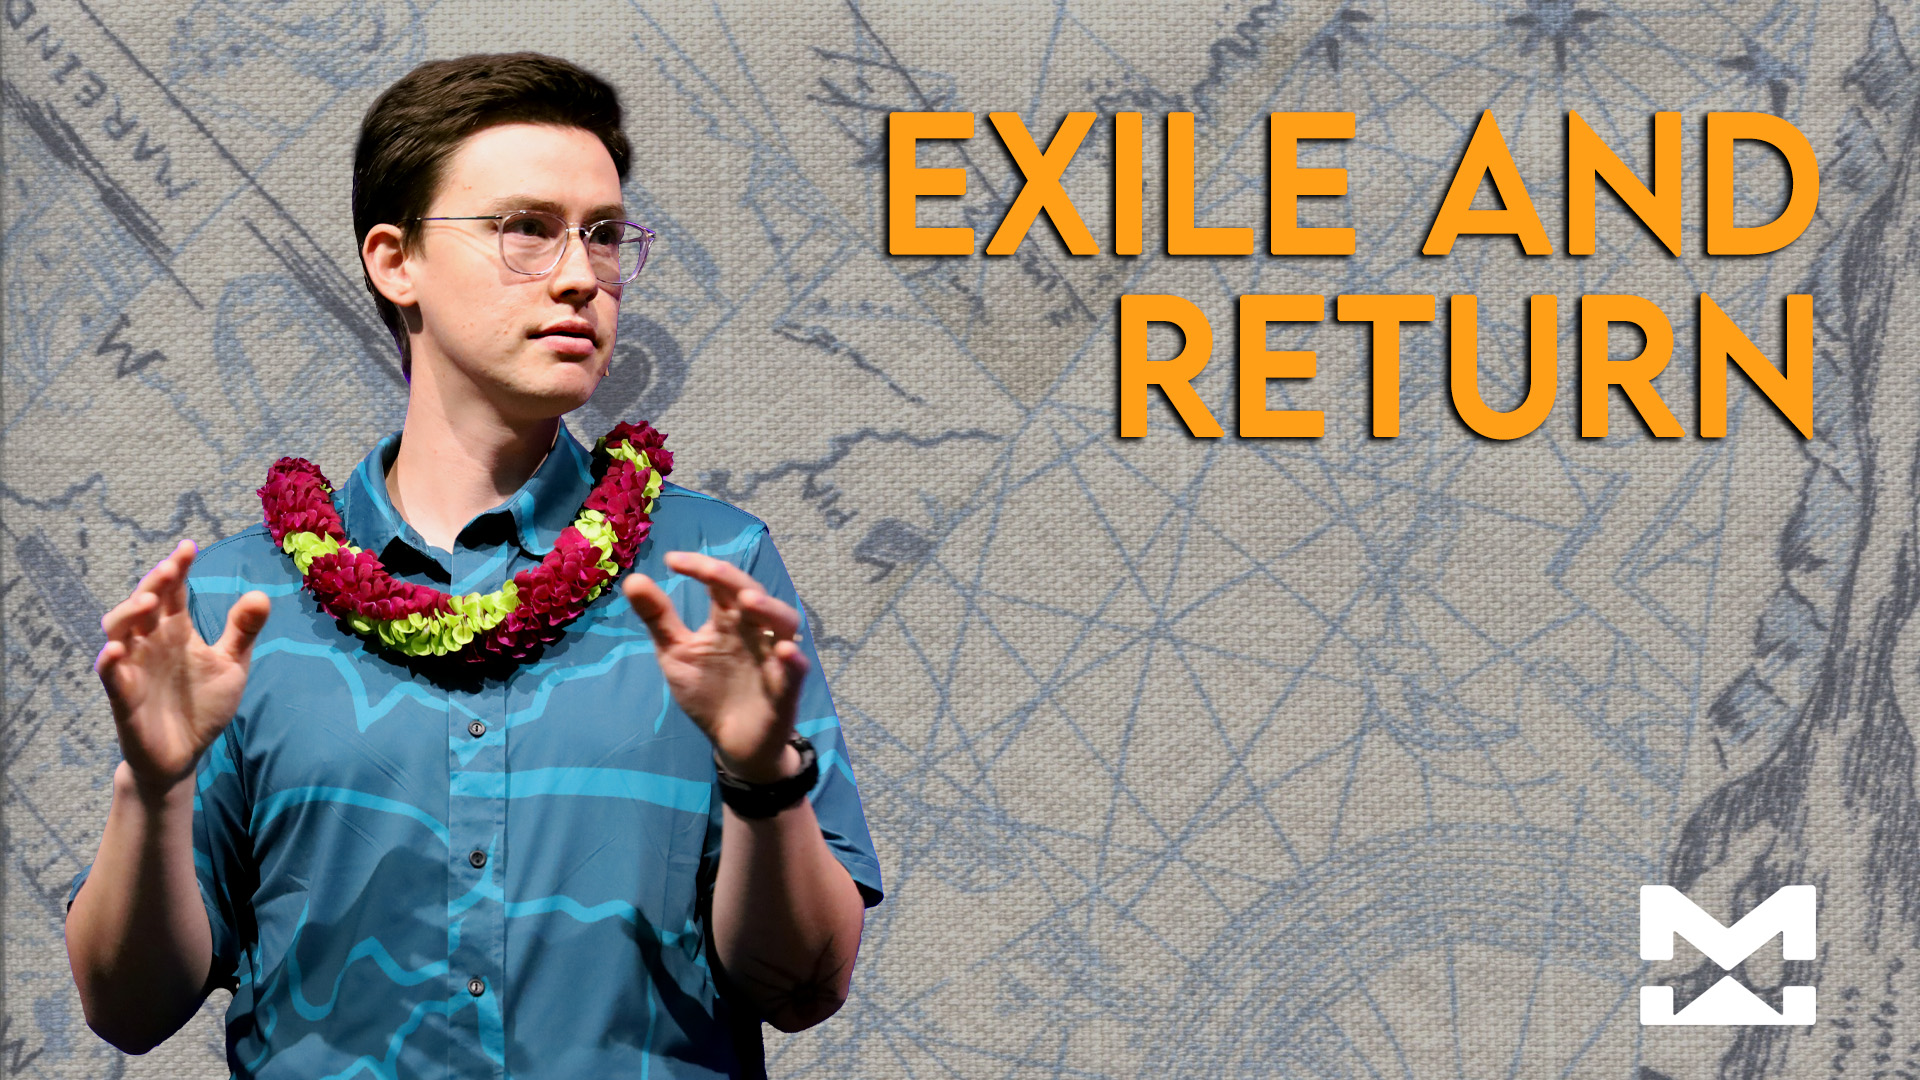 Exile and Return